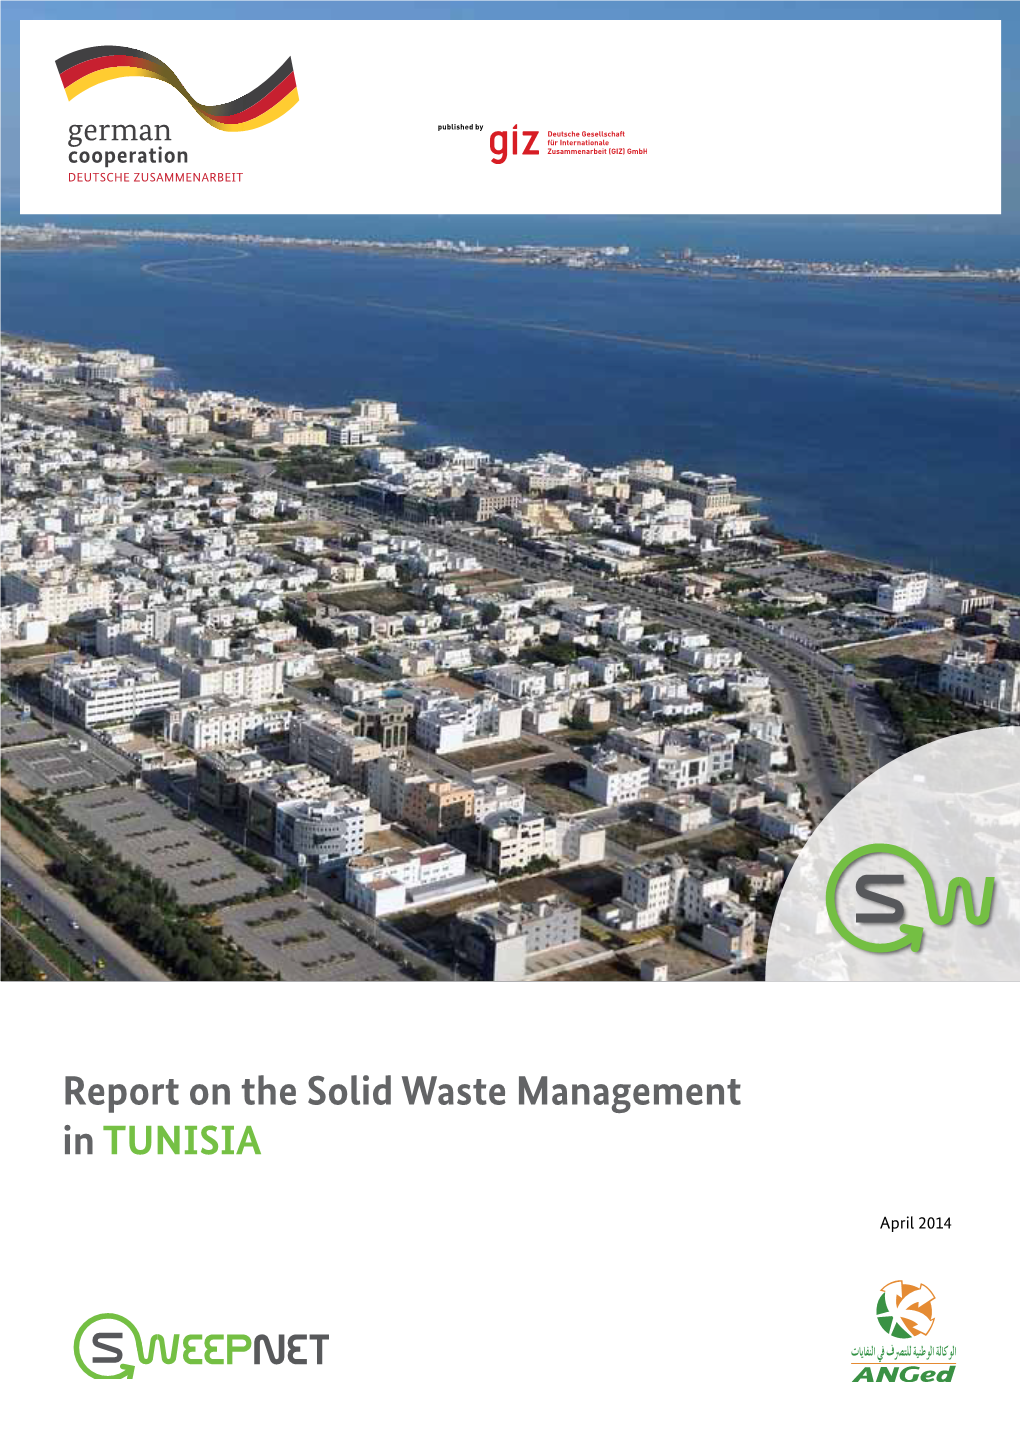 Report on the Solid Waste Management in TUNISIA